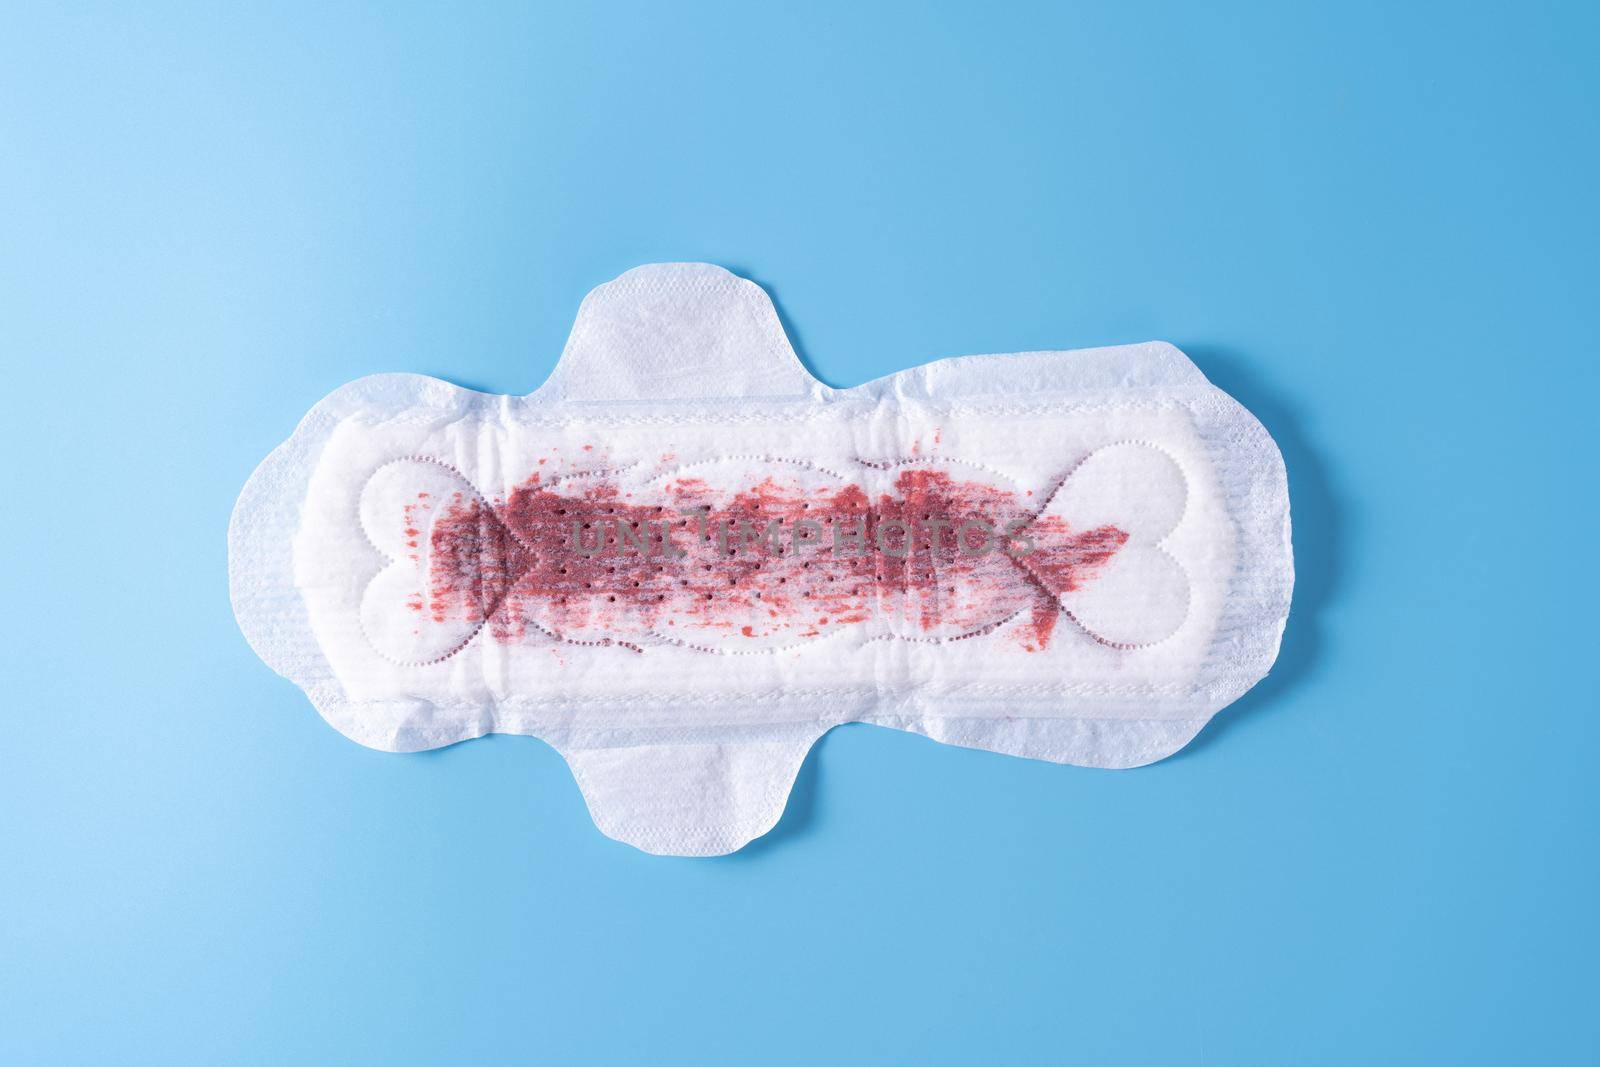 Used Sanitary pad with full amount of blood, Sanitary napkin on blue background. Menstruation, Feminine hygiene, top view.